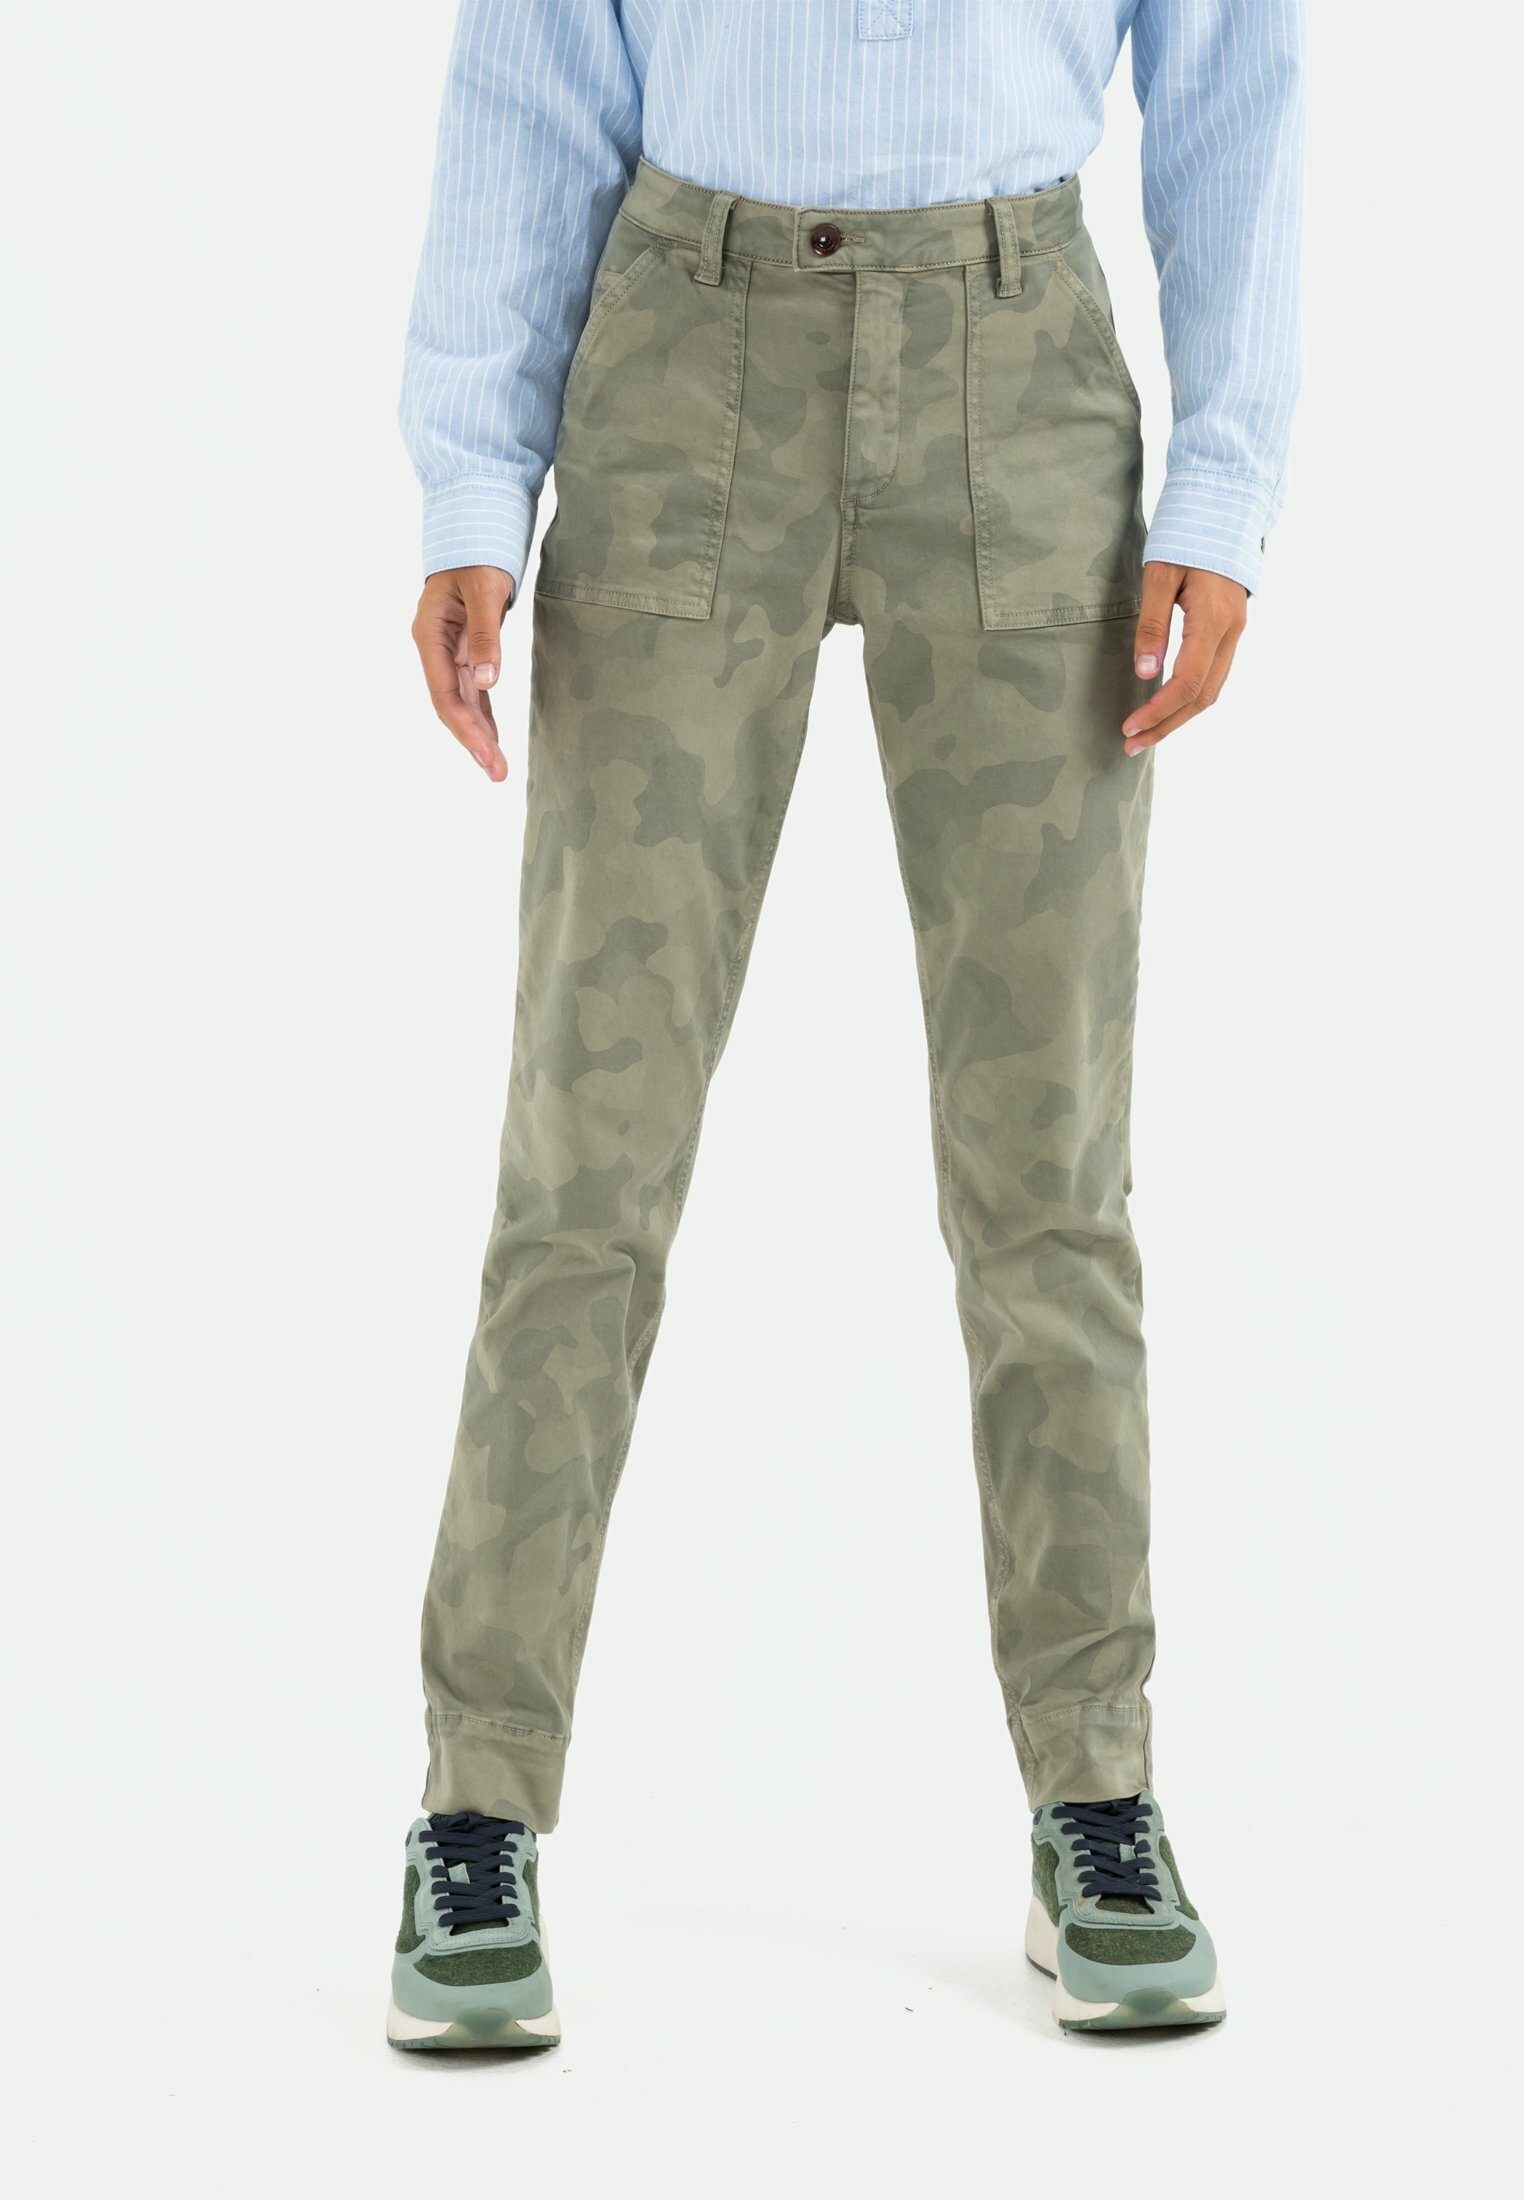 camel active 5-Pocket-Jeans »Hose mit Camouflage Print« Relaxed Fit online  kaufen | OTTO